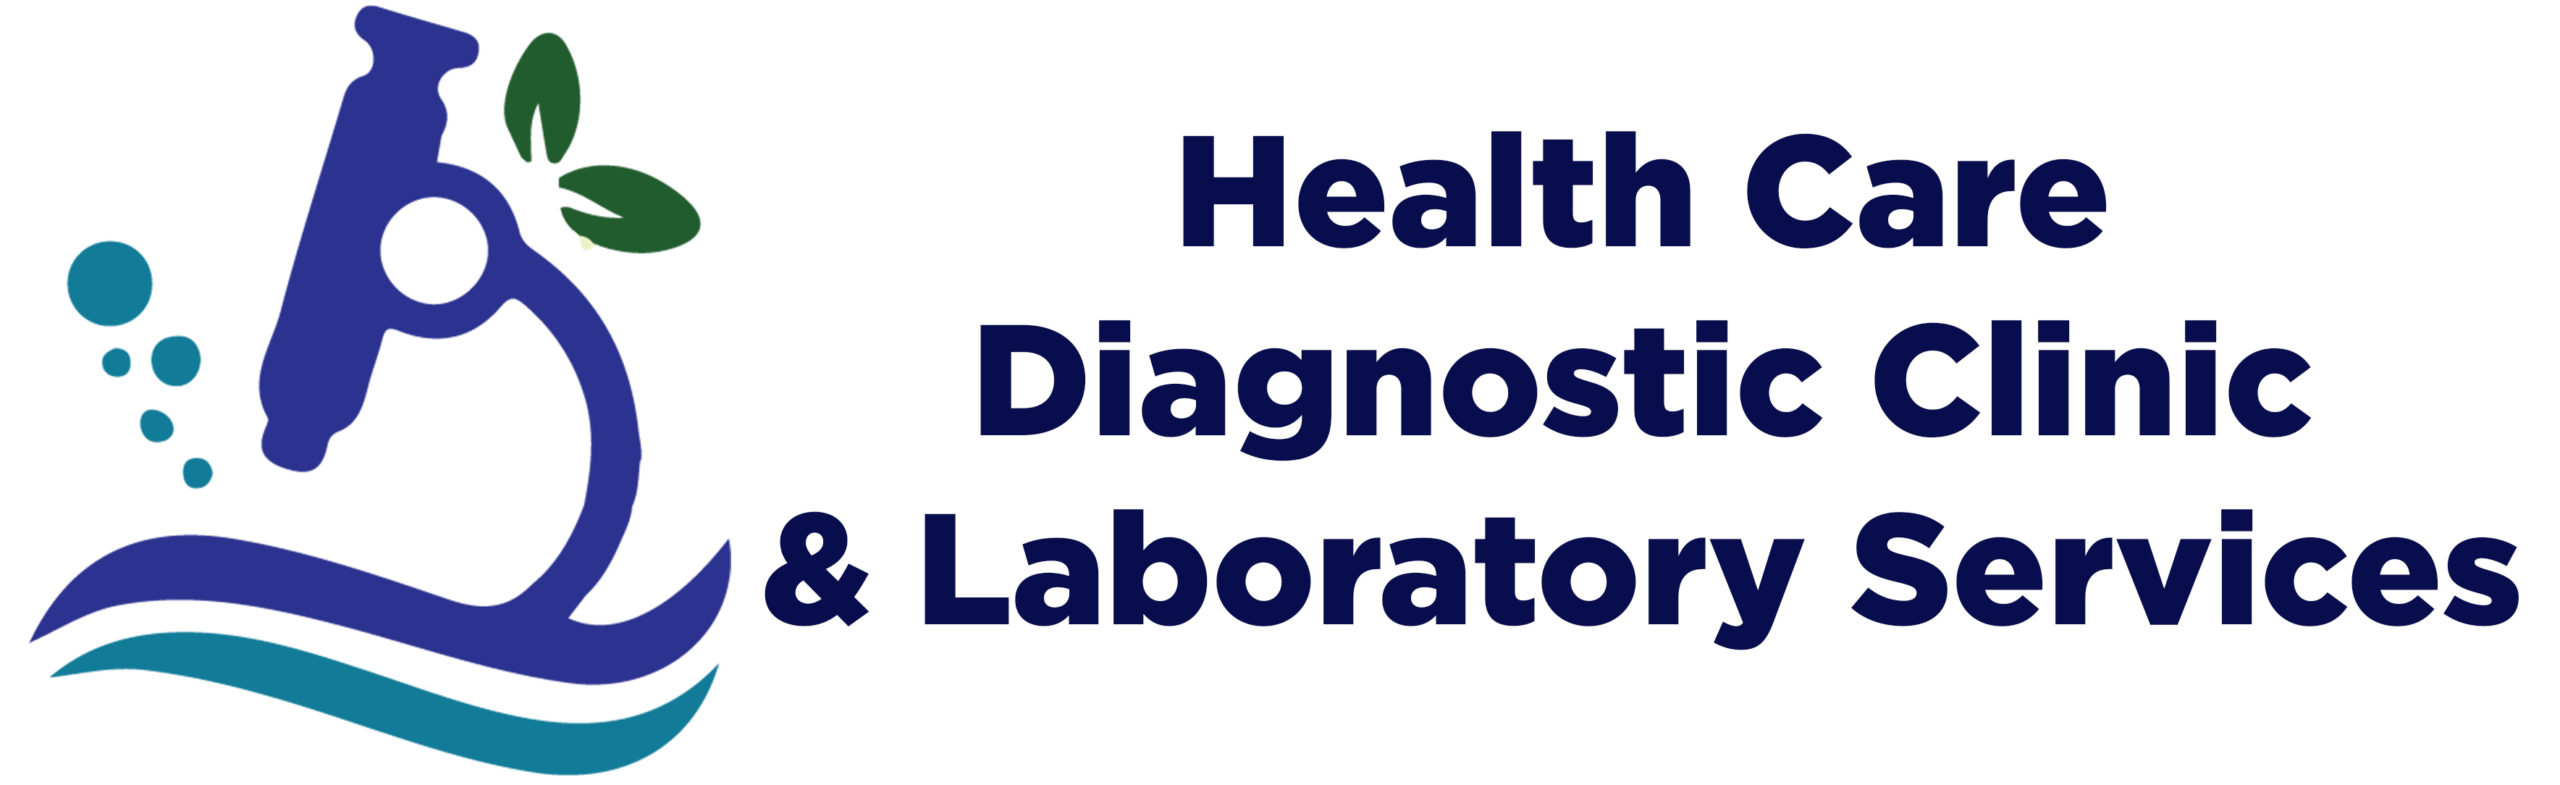 Hackensack Meridian Health Research Institute Establishes Cancer Diagnostics  Company | Clinical Lab Products